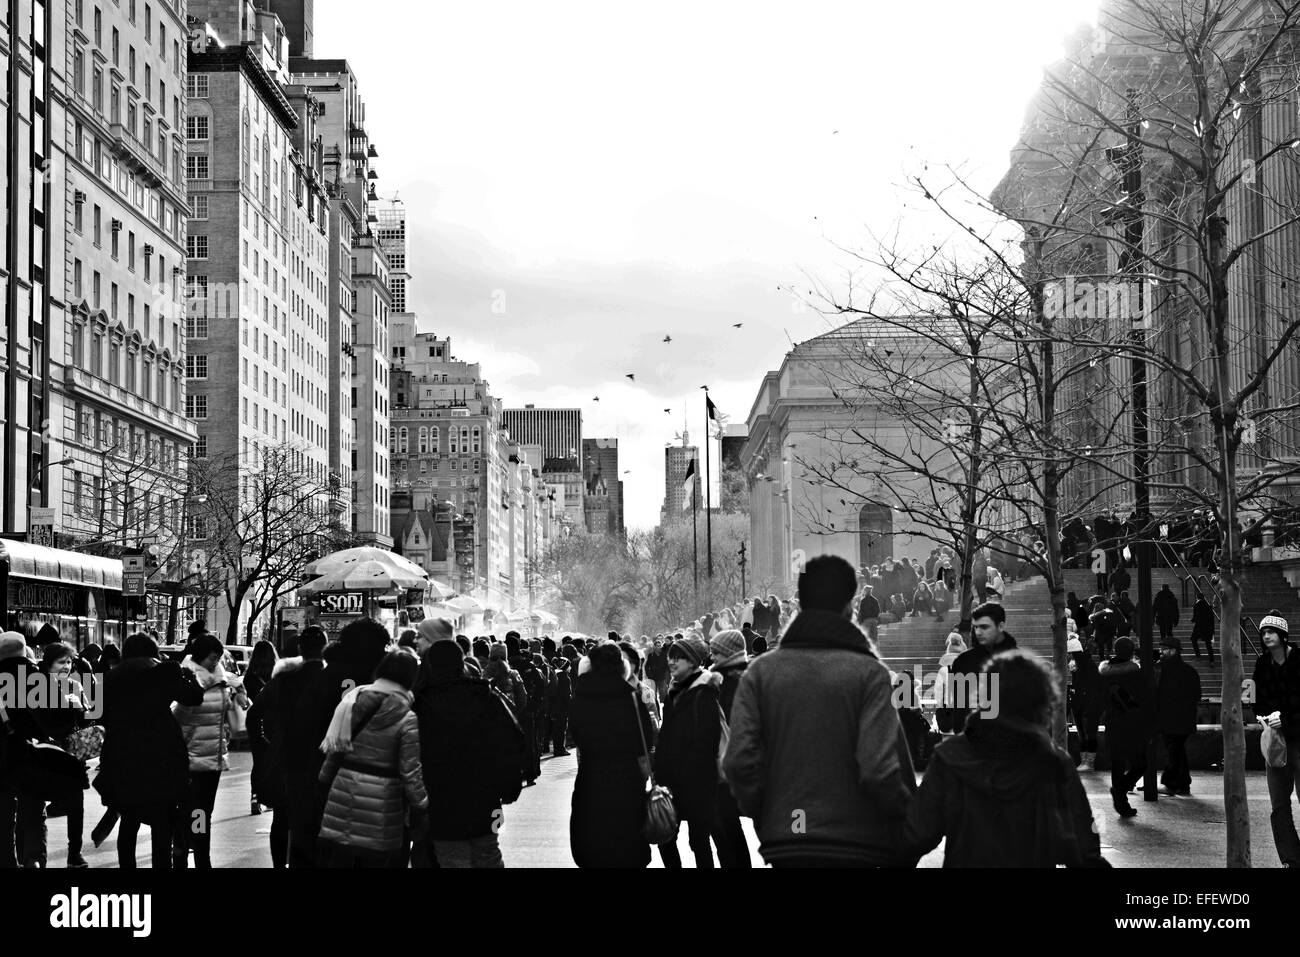 The MET in New York City. Street Photography. Crowd of people. Line. Black and White Stock Photo